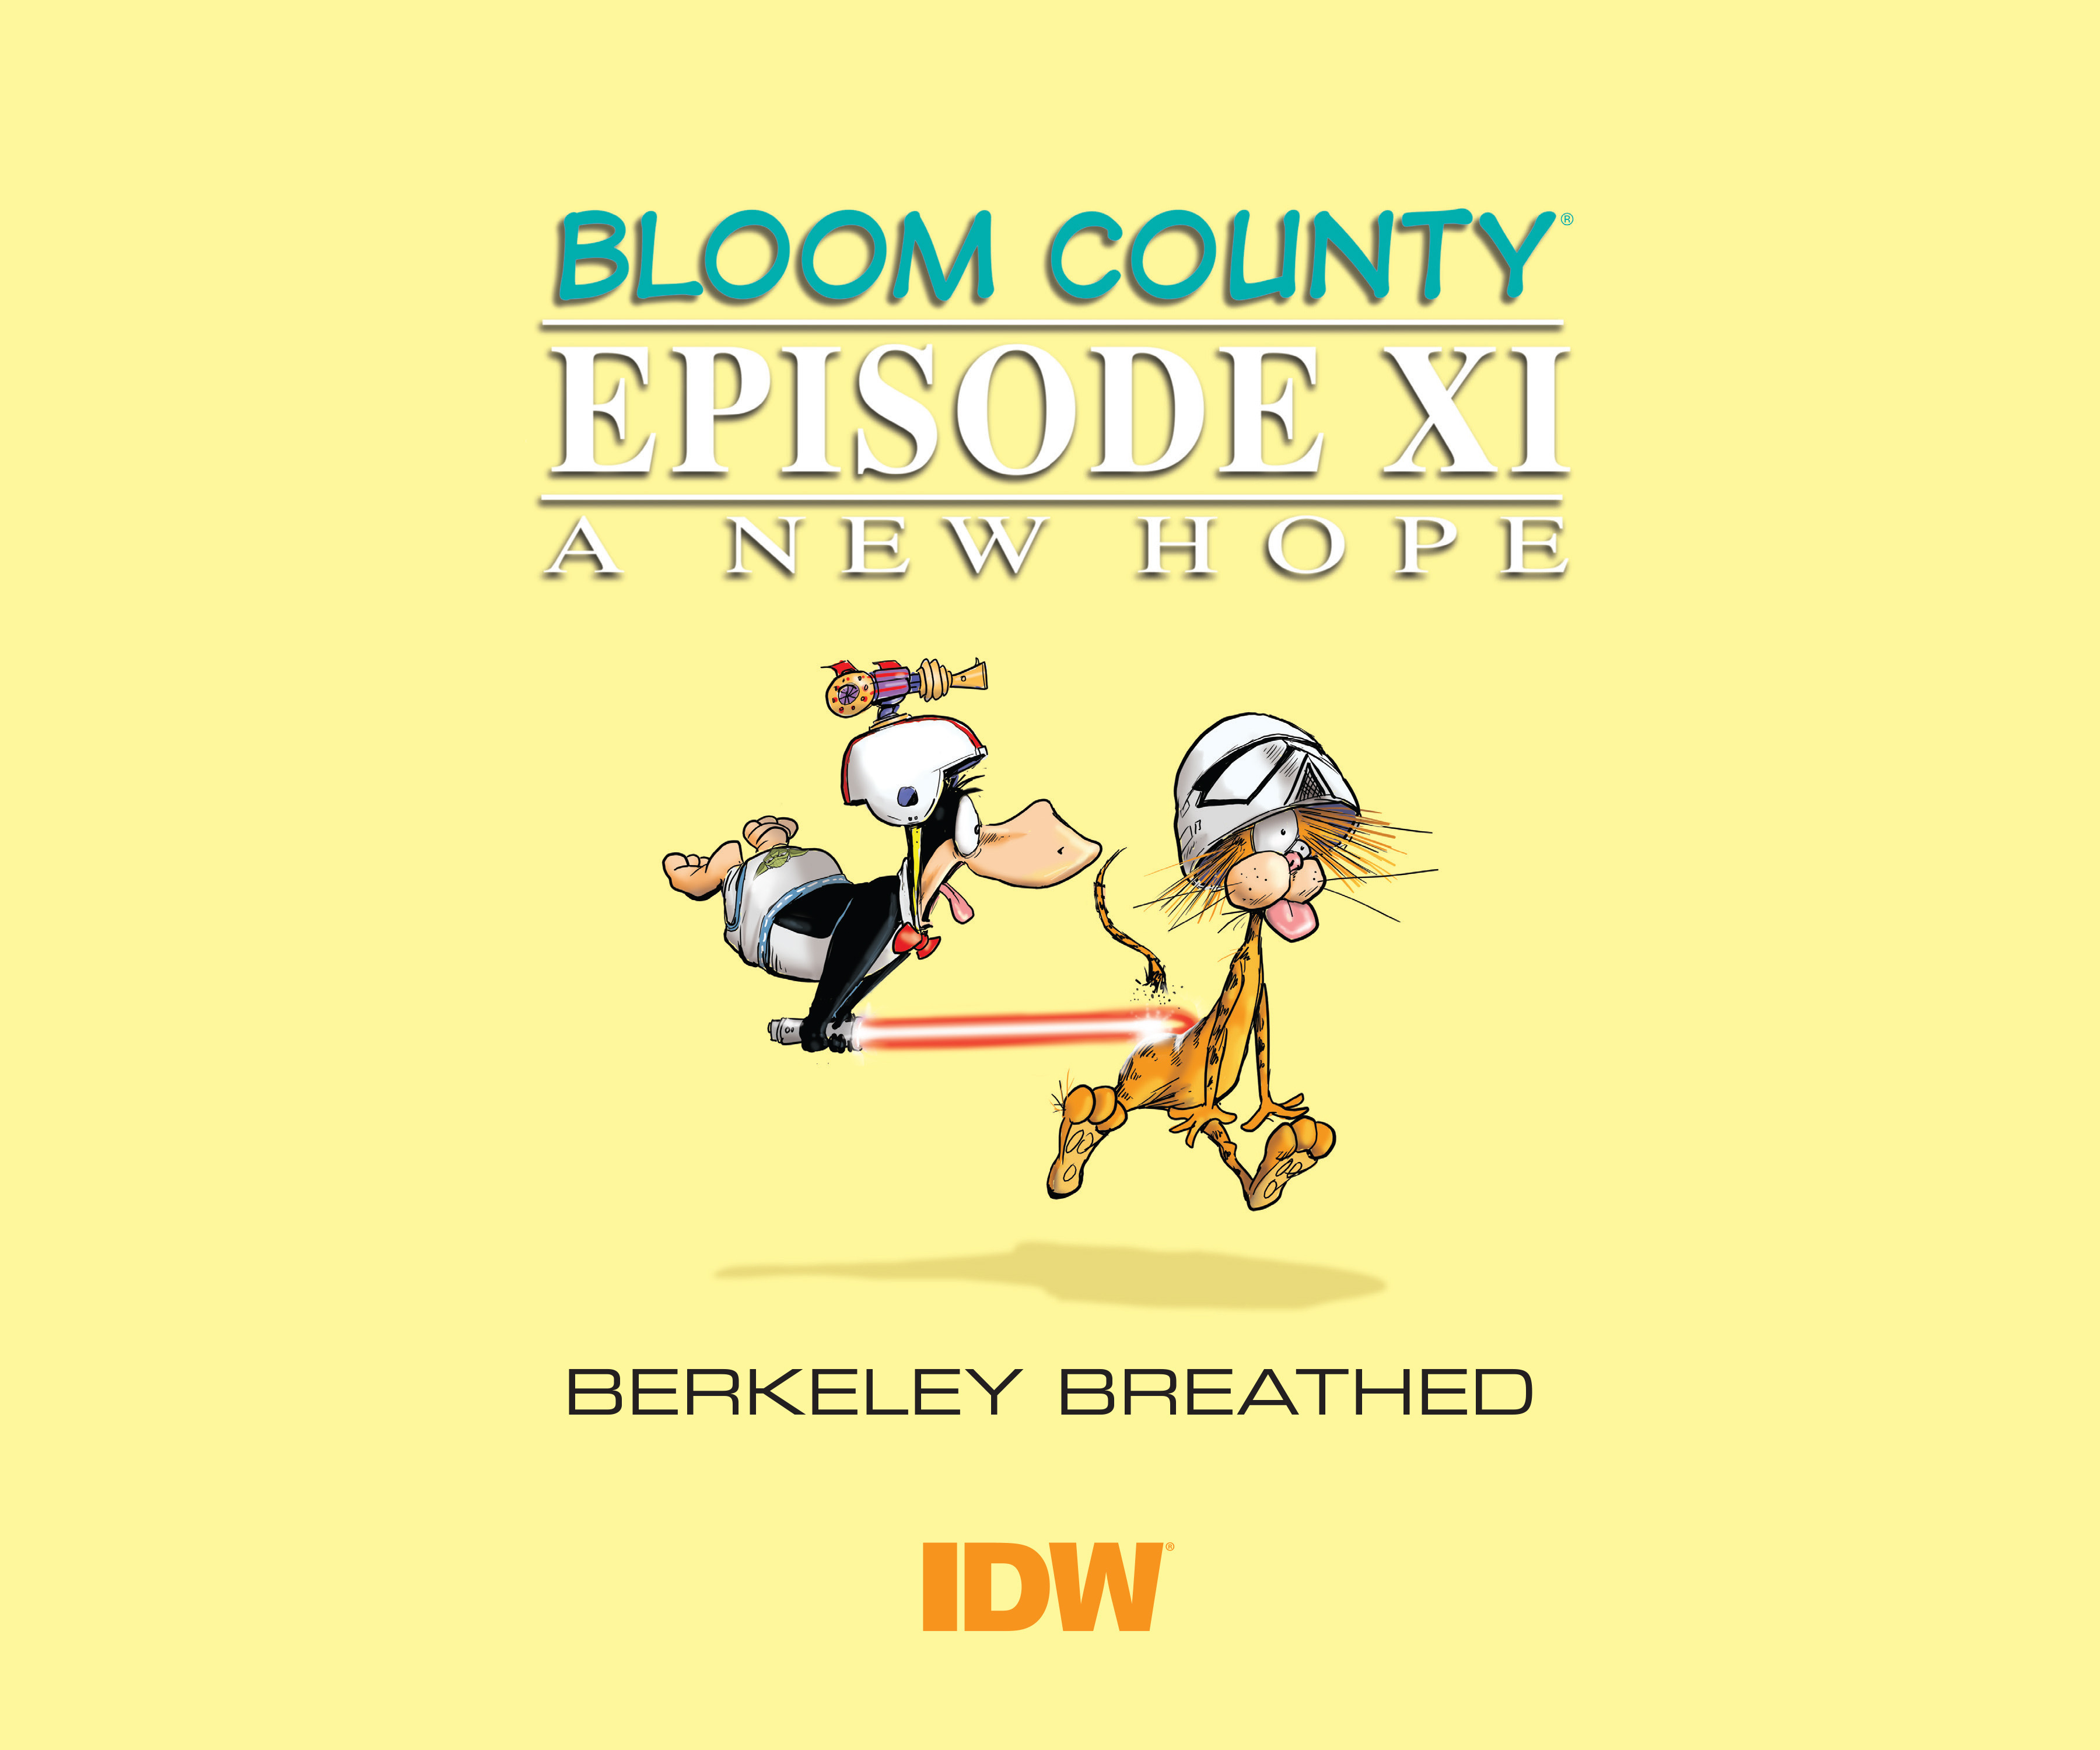 Read online Bloom County Episode XI: A New Hope comic -  Issue # Full - 3